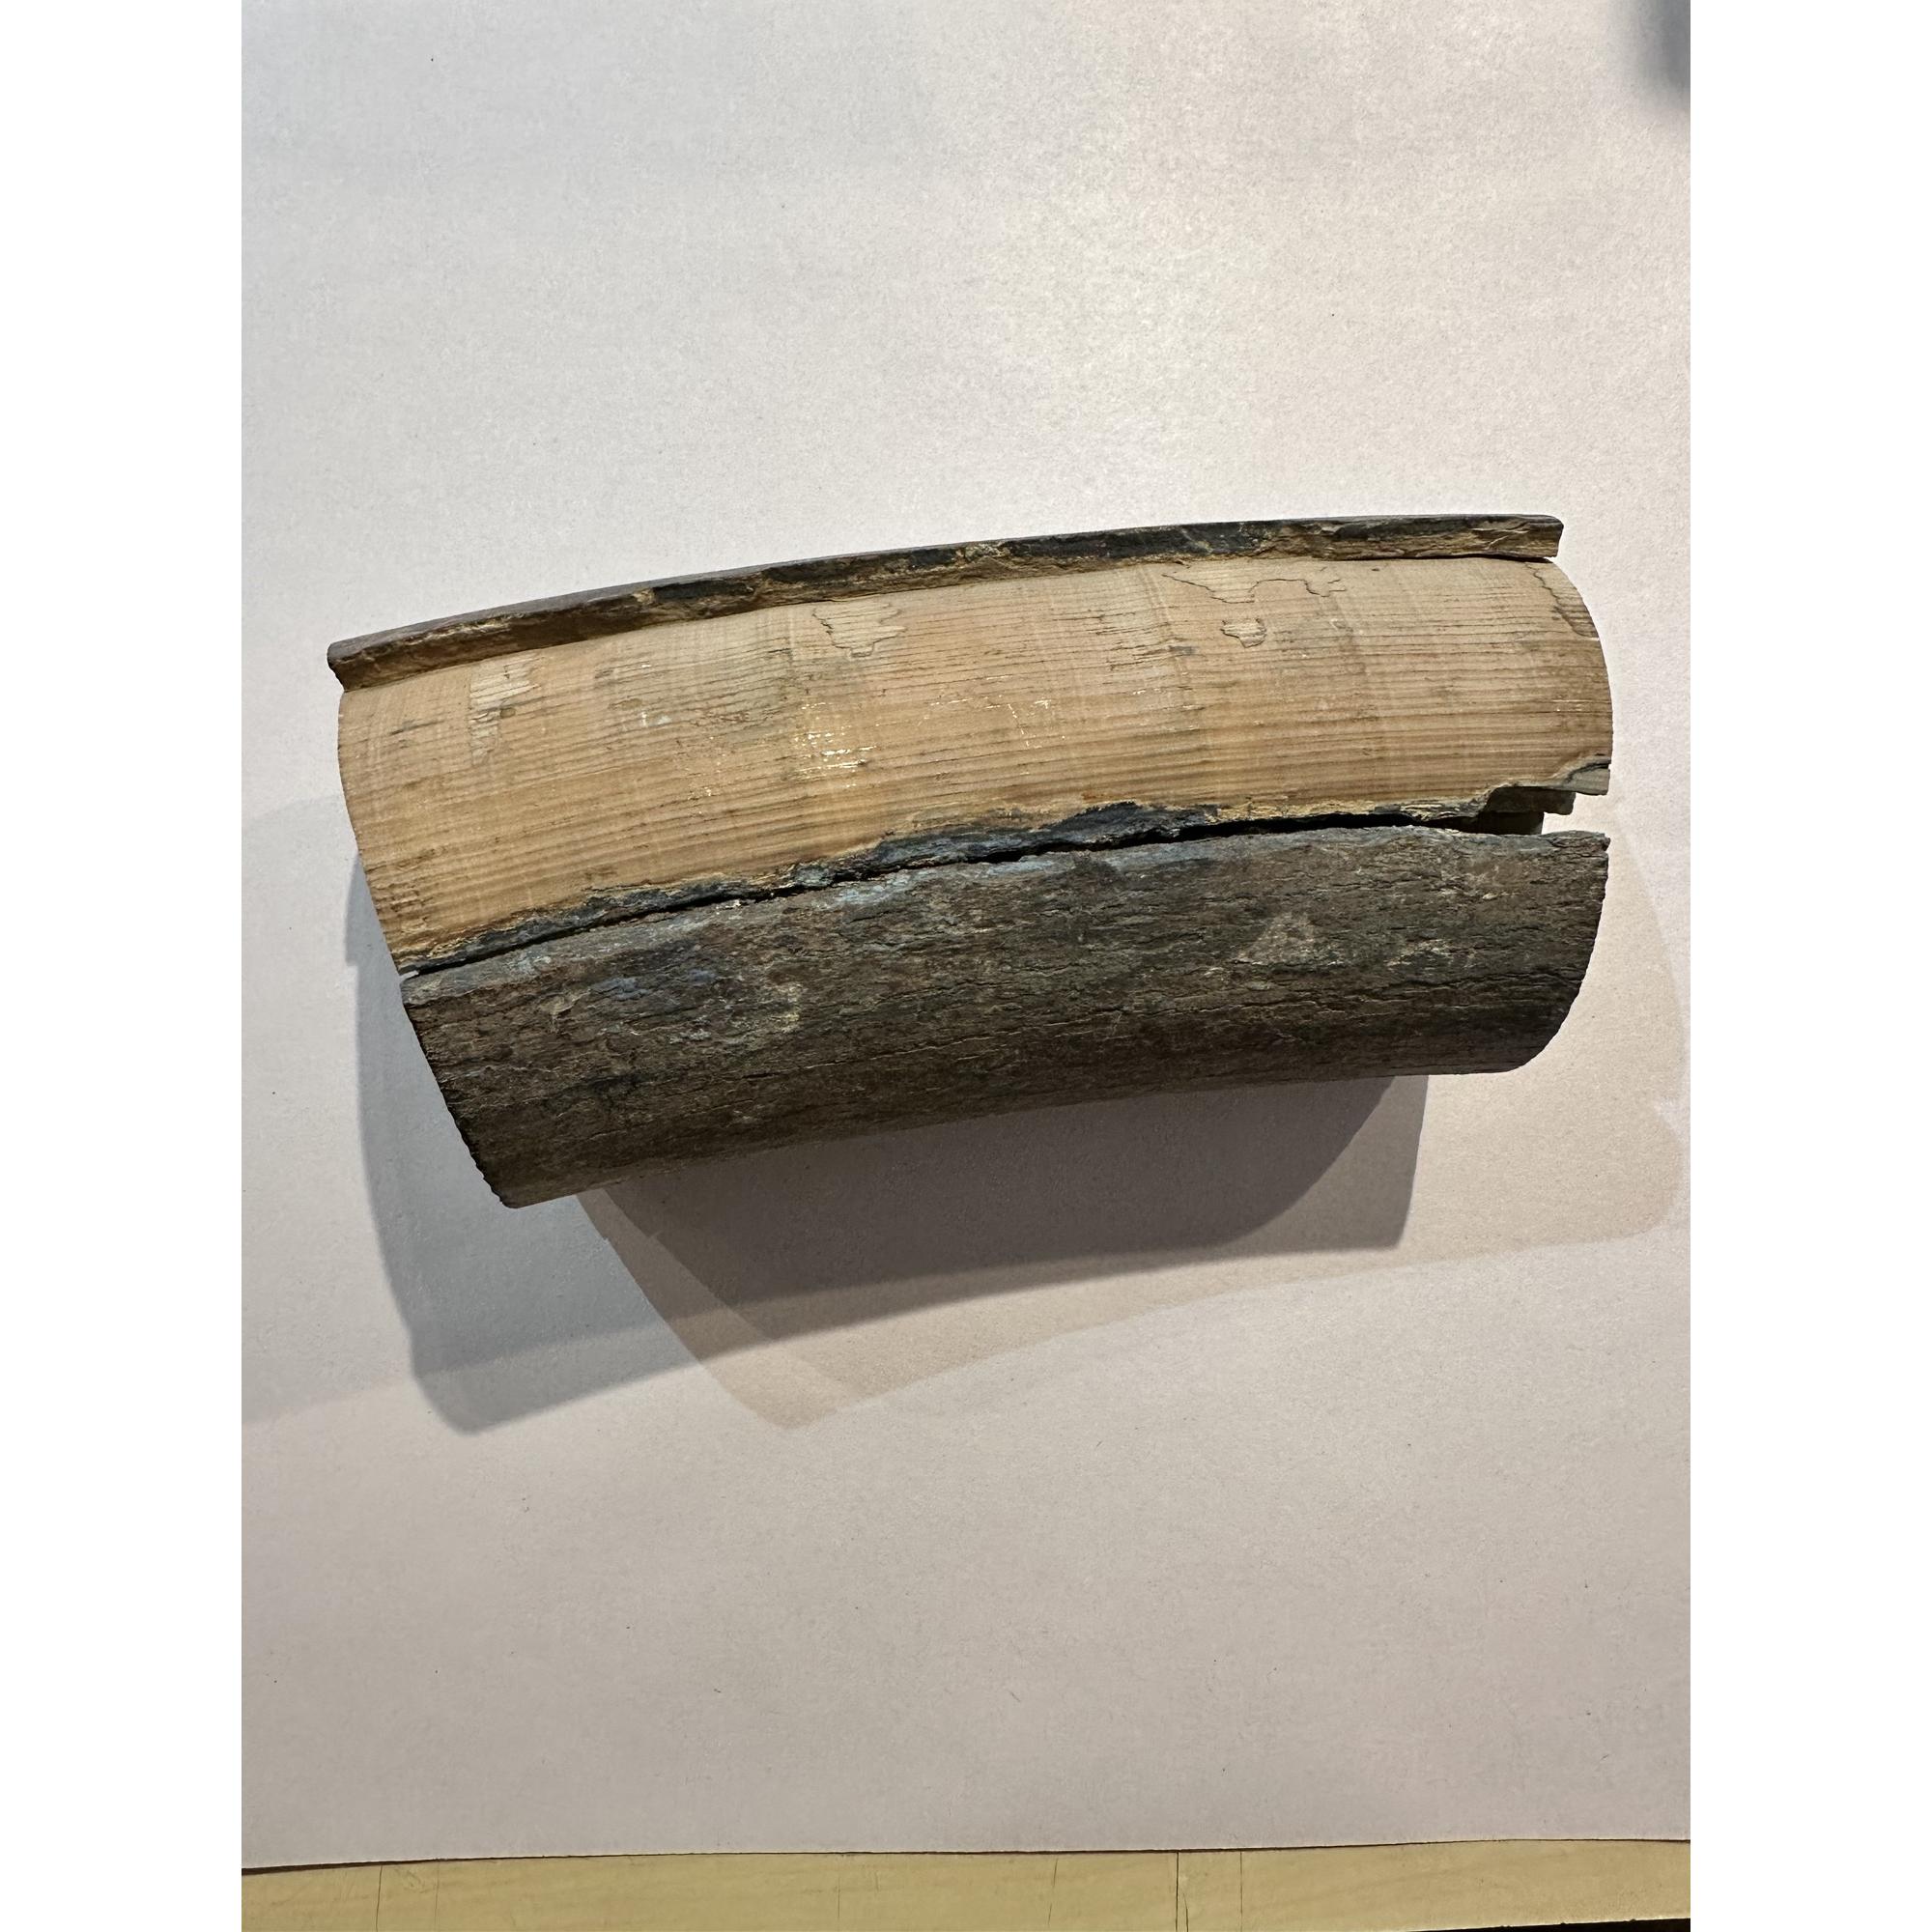 Mammoth Tusk section, 9 inches long Prehistoric Online